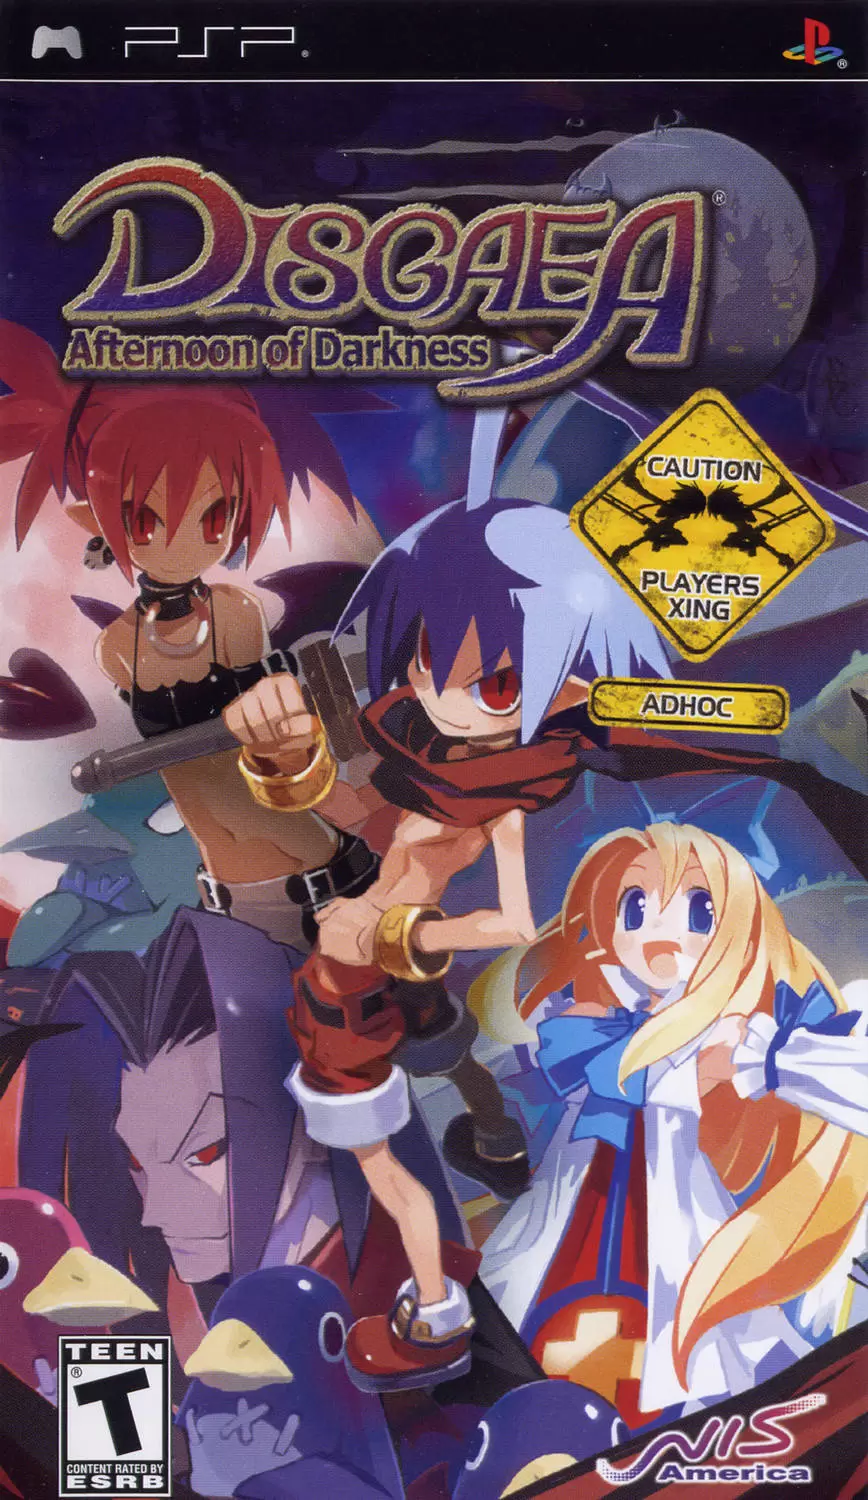 PSP Games - Disgaea: Afternoon of Darkness